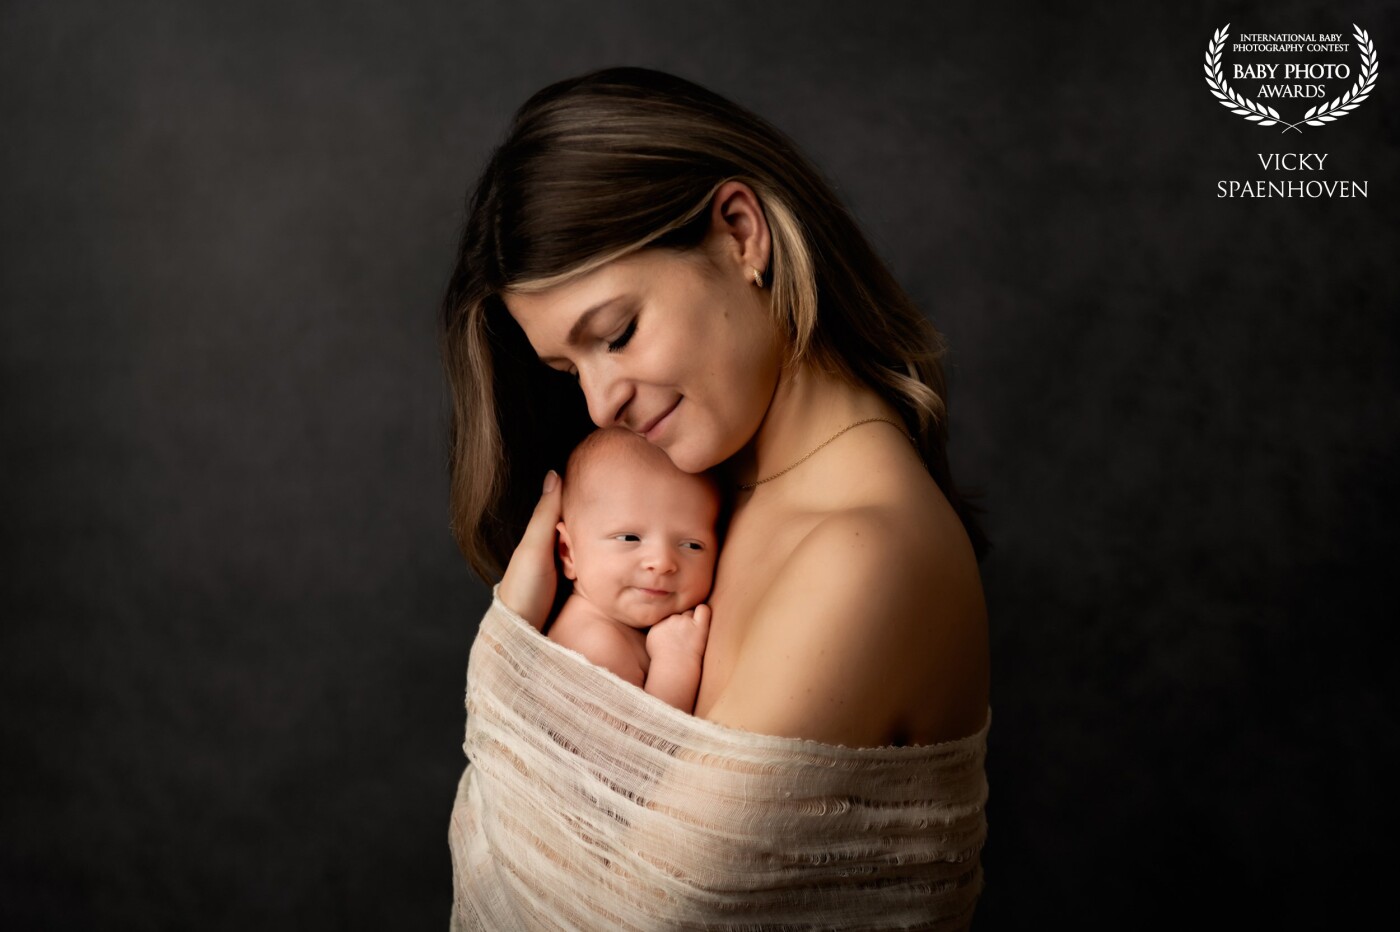 Such an intimate portrait of beautiful mom Sarah with her babyboy Jake. I love it when baby’s are awake for the family pictures. Not always easy to capture the right moment but so great if parents can have a picture like this.